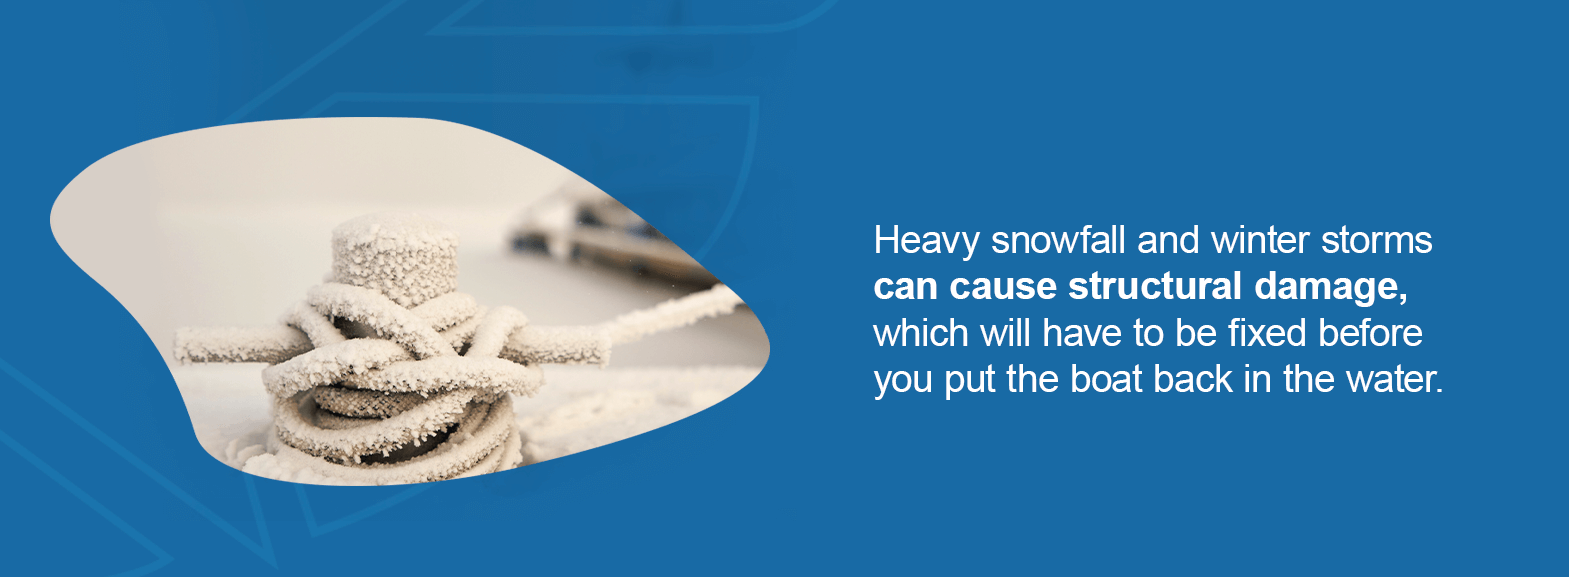 Heavy snowfall and winter storms can cause structural damage, which will have to be fixed before you put the boat back in the water.